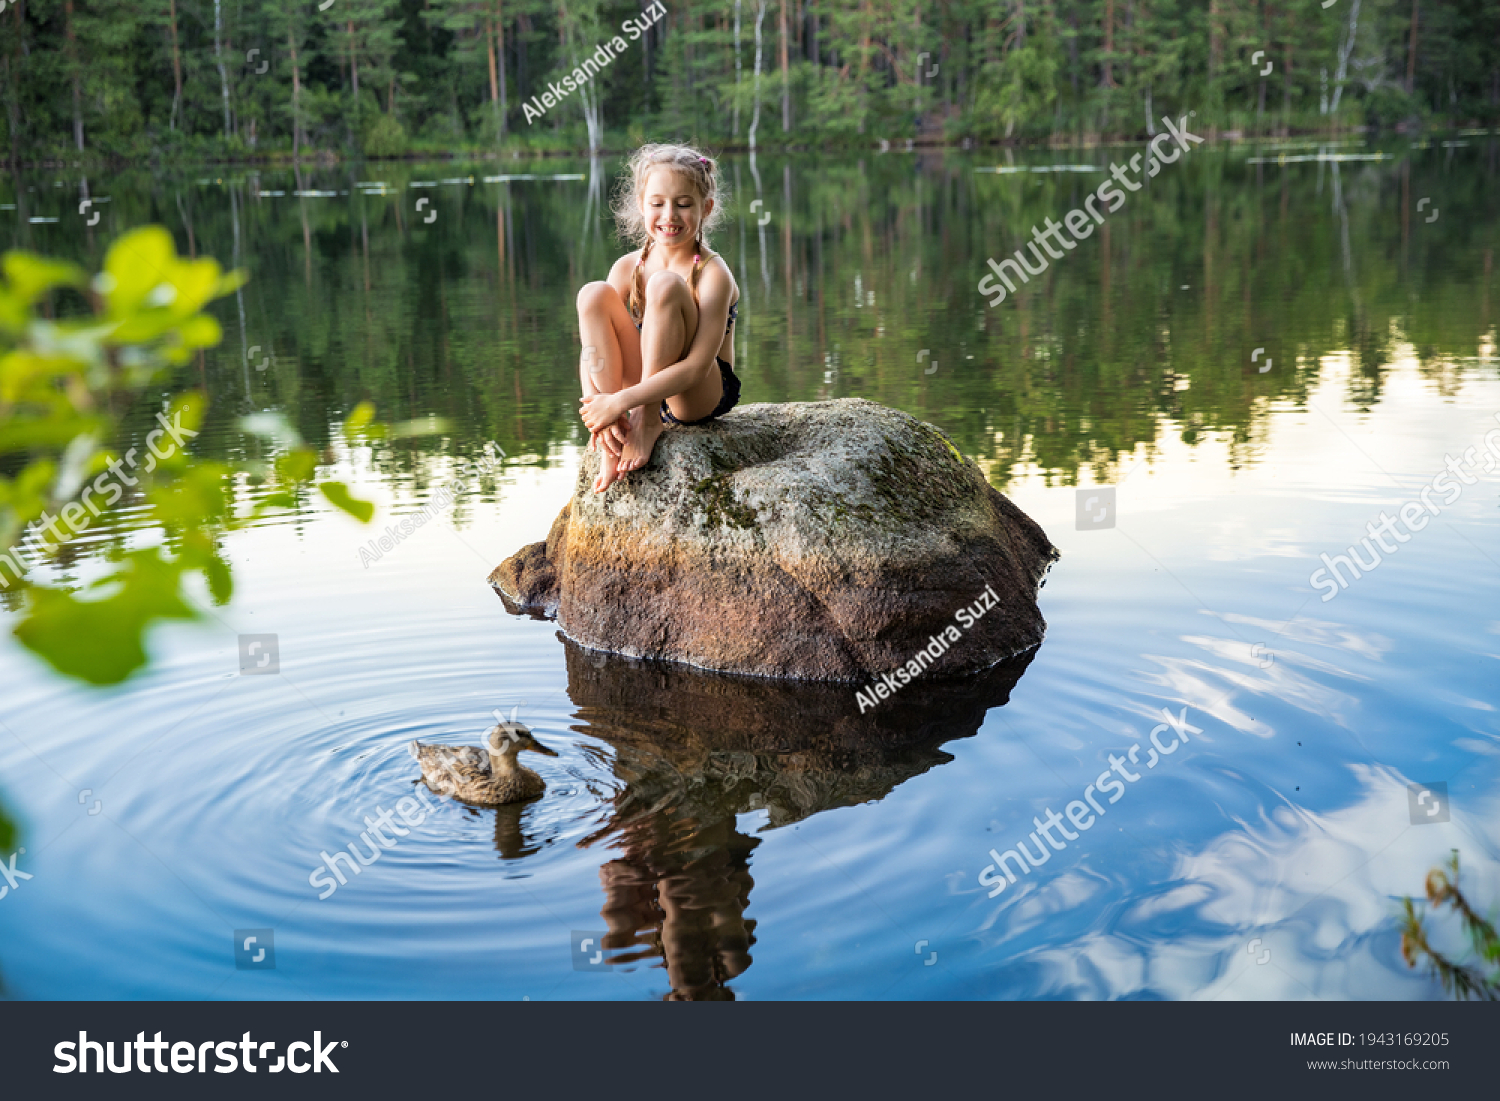 Cute little girl sitting on a rock in lake. Enjoying summer vacation. Child and Nature. Happy isolation concept. Exploring Finland. Scandinavian landscape.  #1943169205